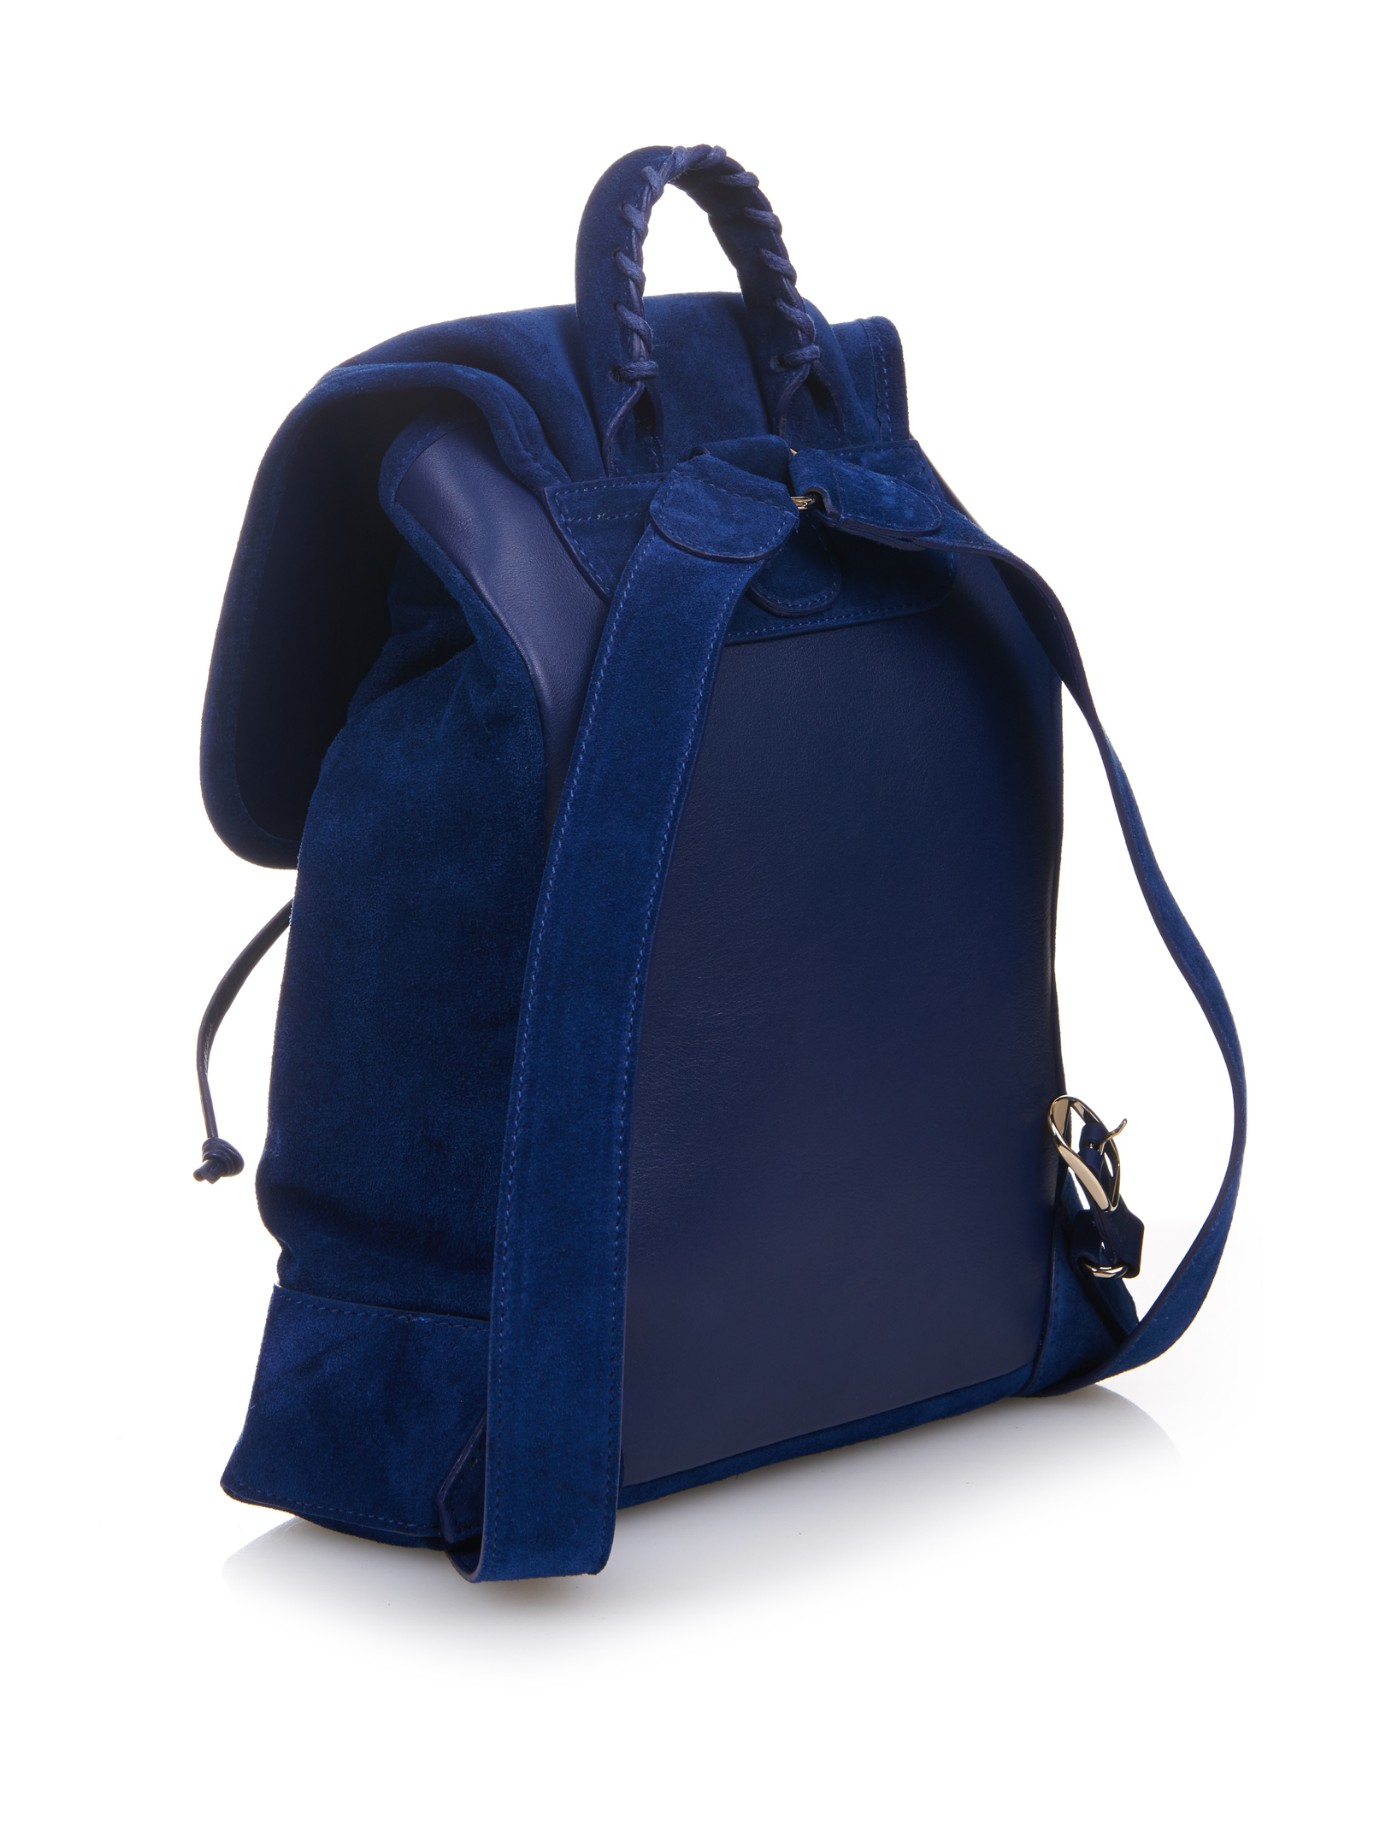 Balenciaga Classic Traveller Suede Backpack in Blue | Lyst